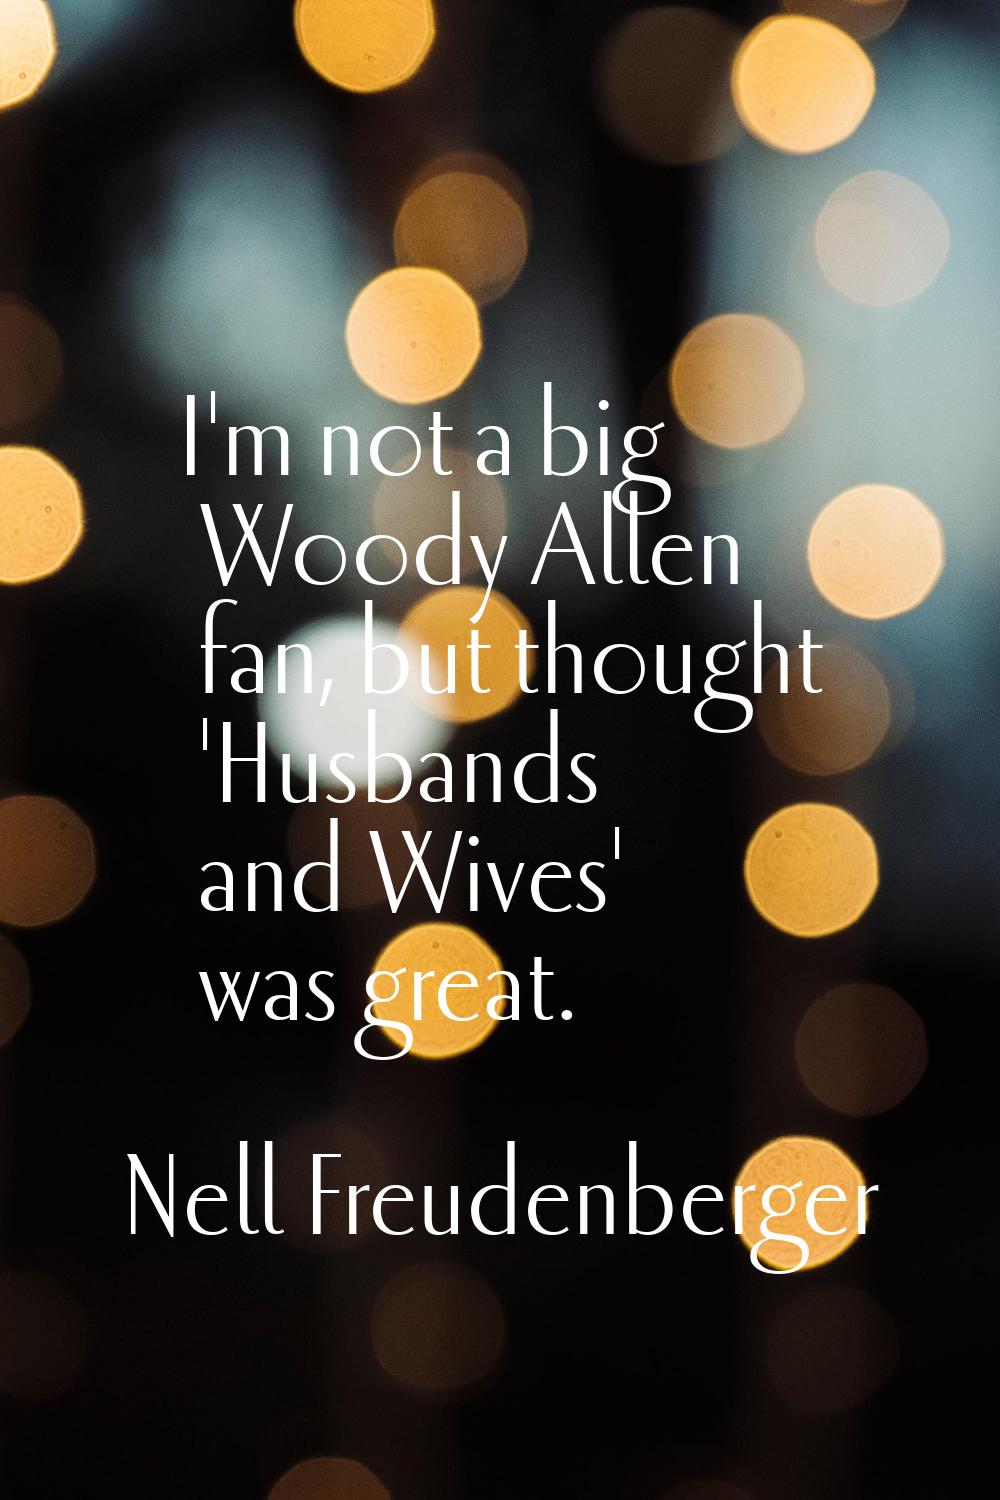 I'm not a big Woody Allen fan, but thought 'Husbands and Wives' was great.